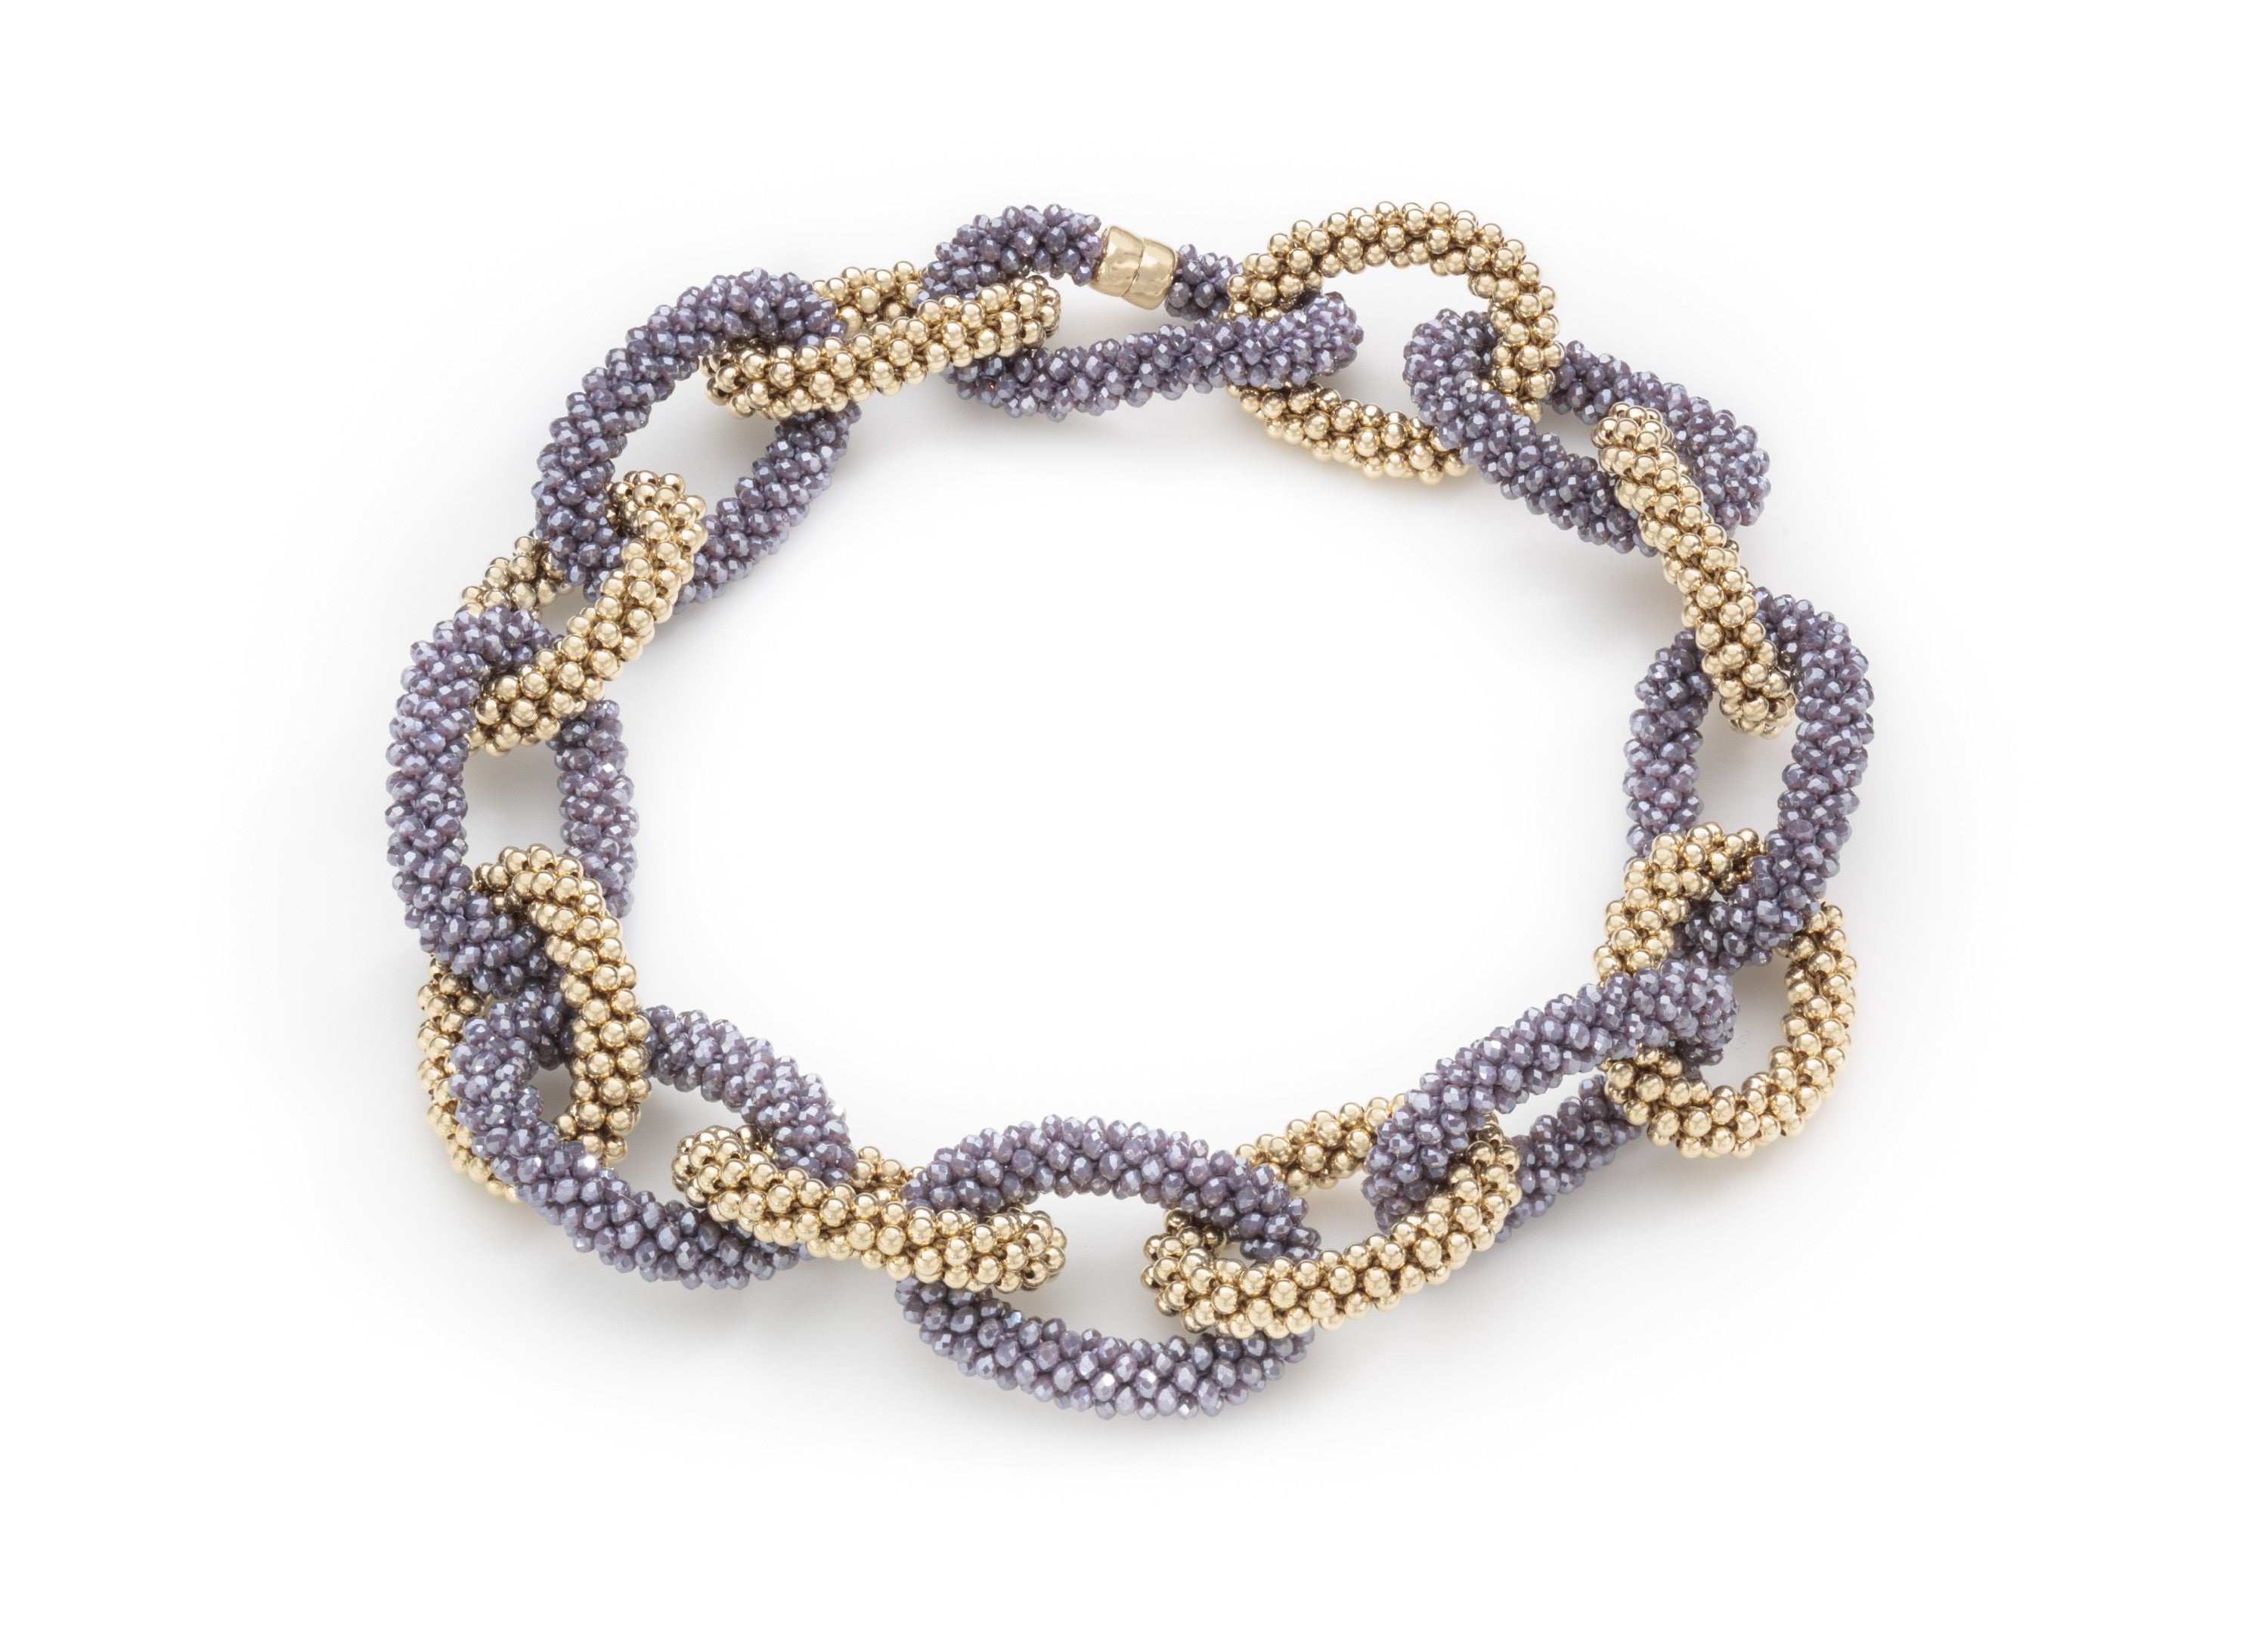 A Lavender Crystal and Gold Linkable Necklace